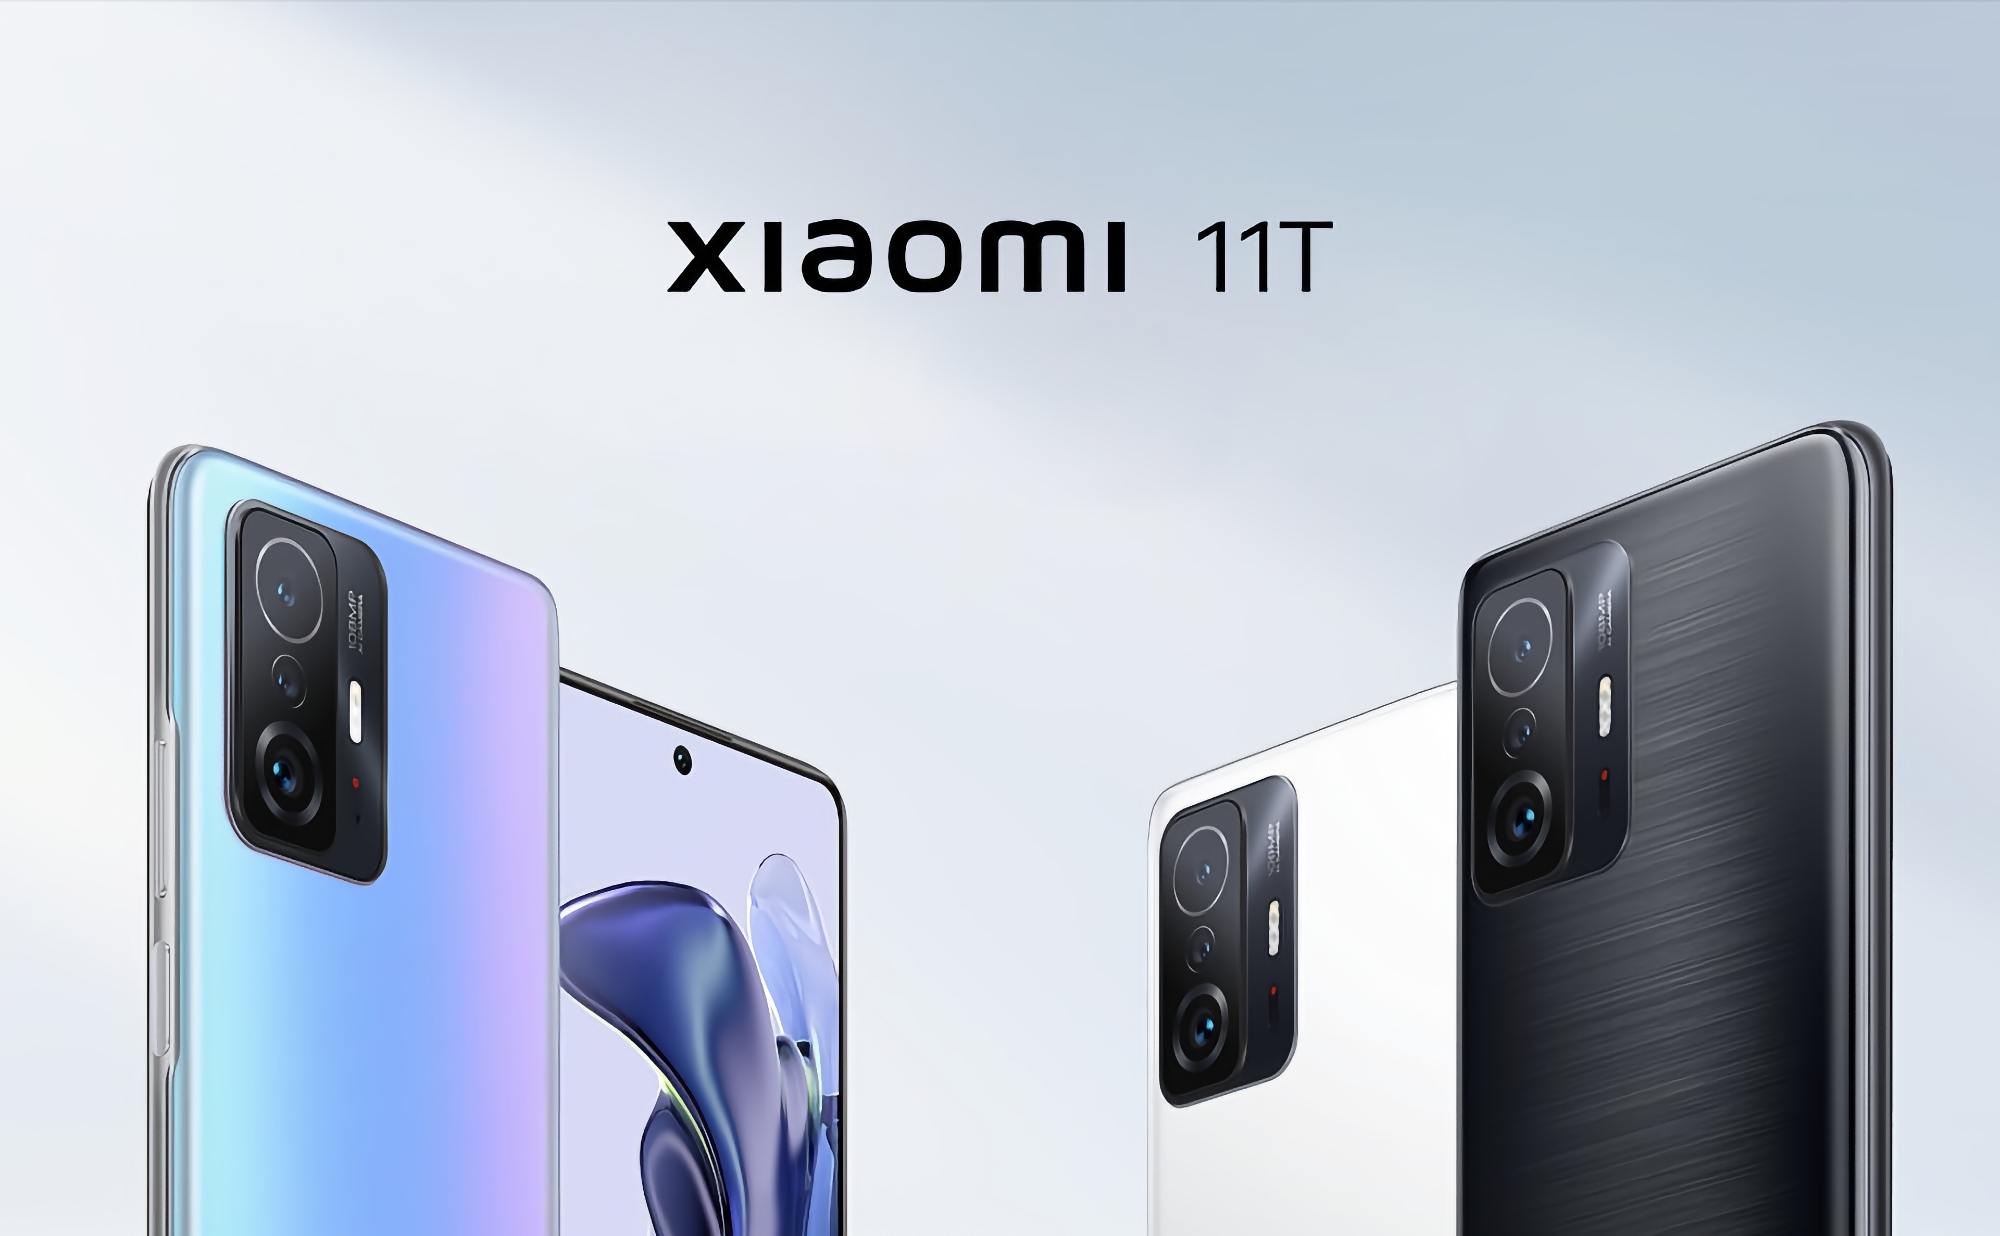 Xiaomi 11T: smartphone with MediaTek Dimensity 1200-Ultra processor, 108 MP camera, 5000 mAh battery and price tag from $449 